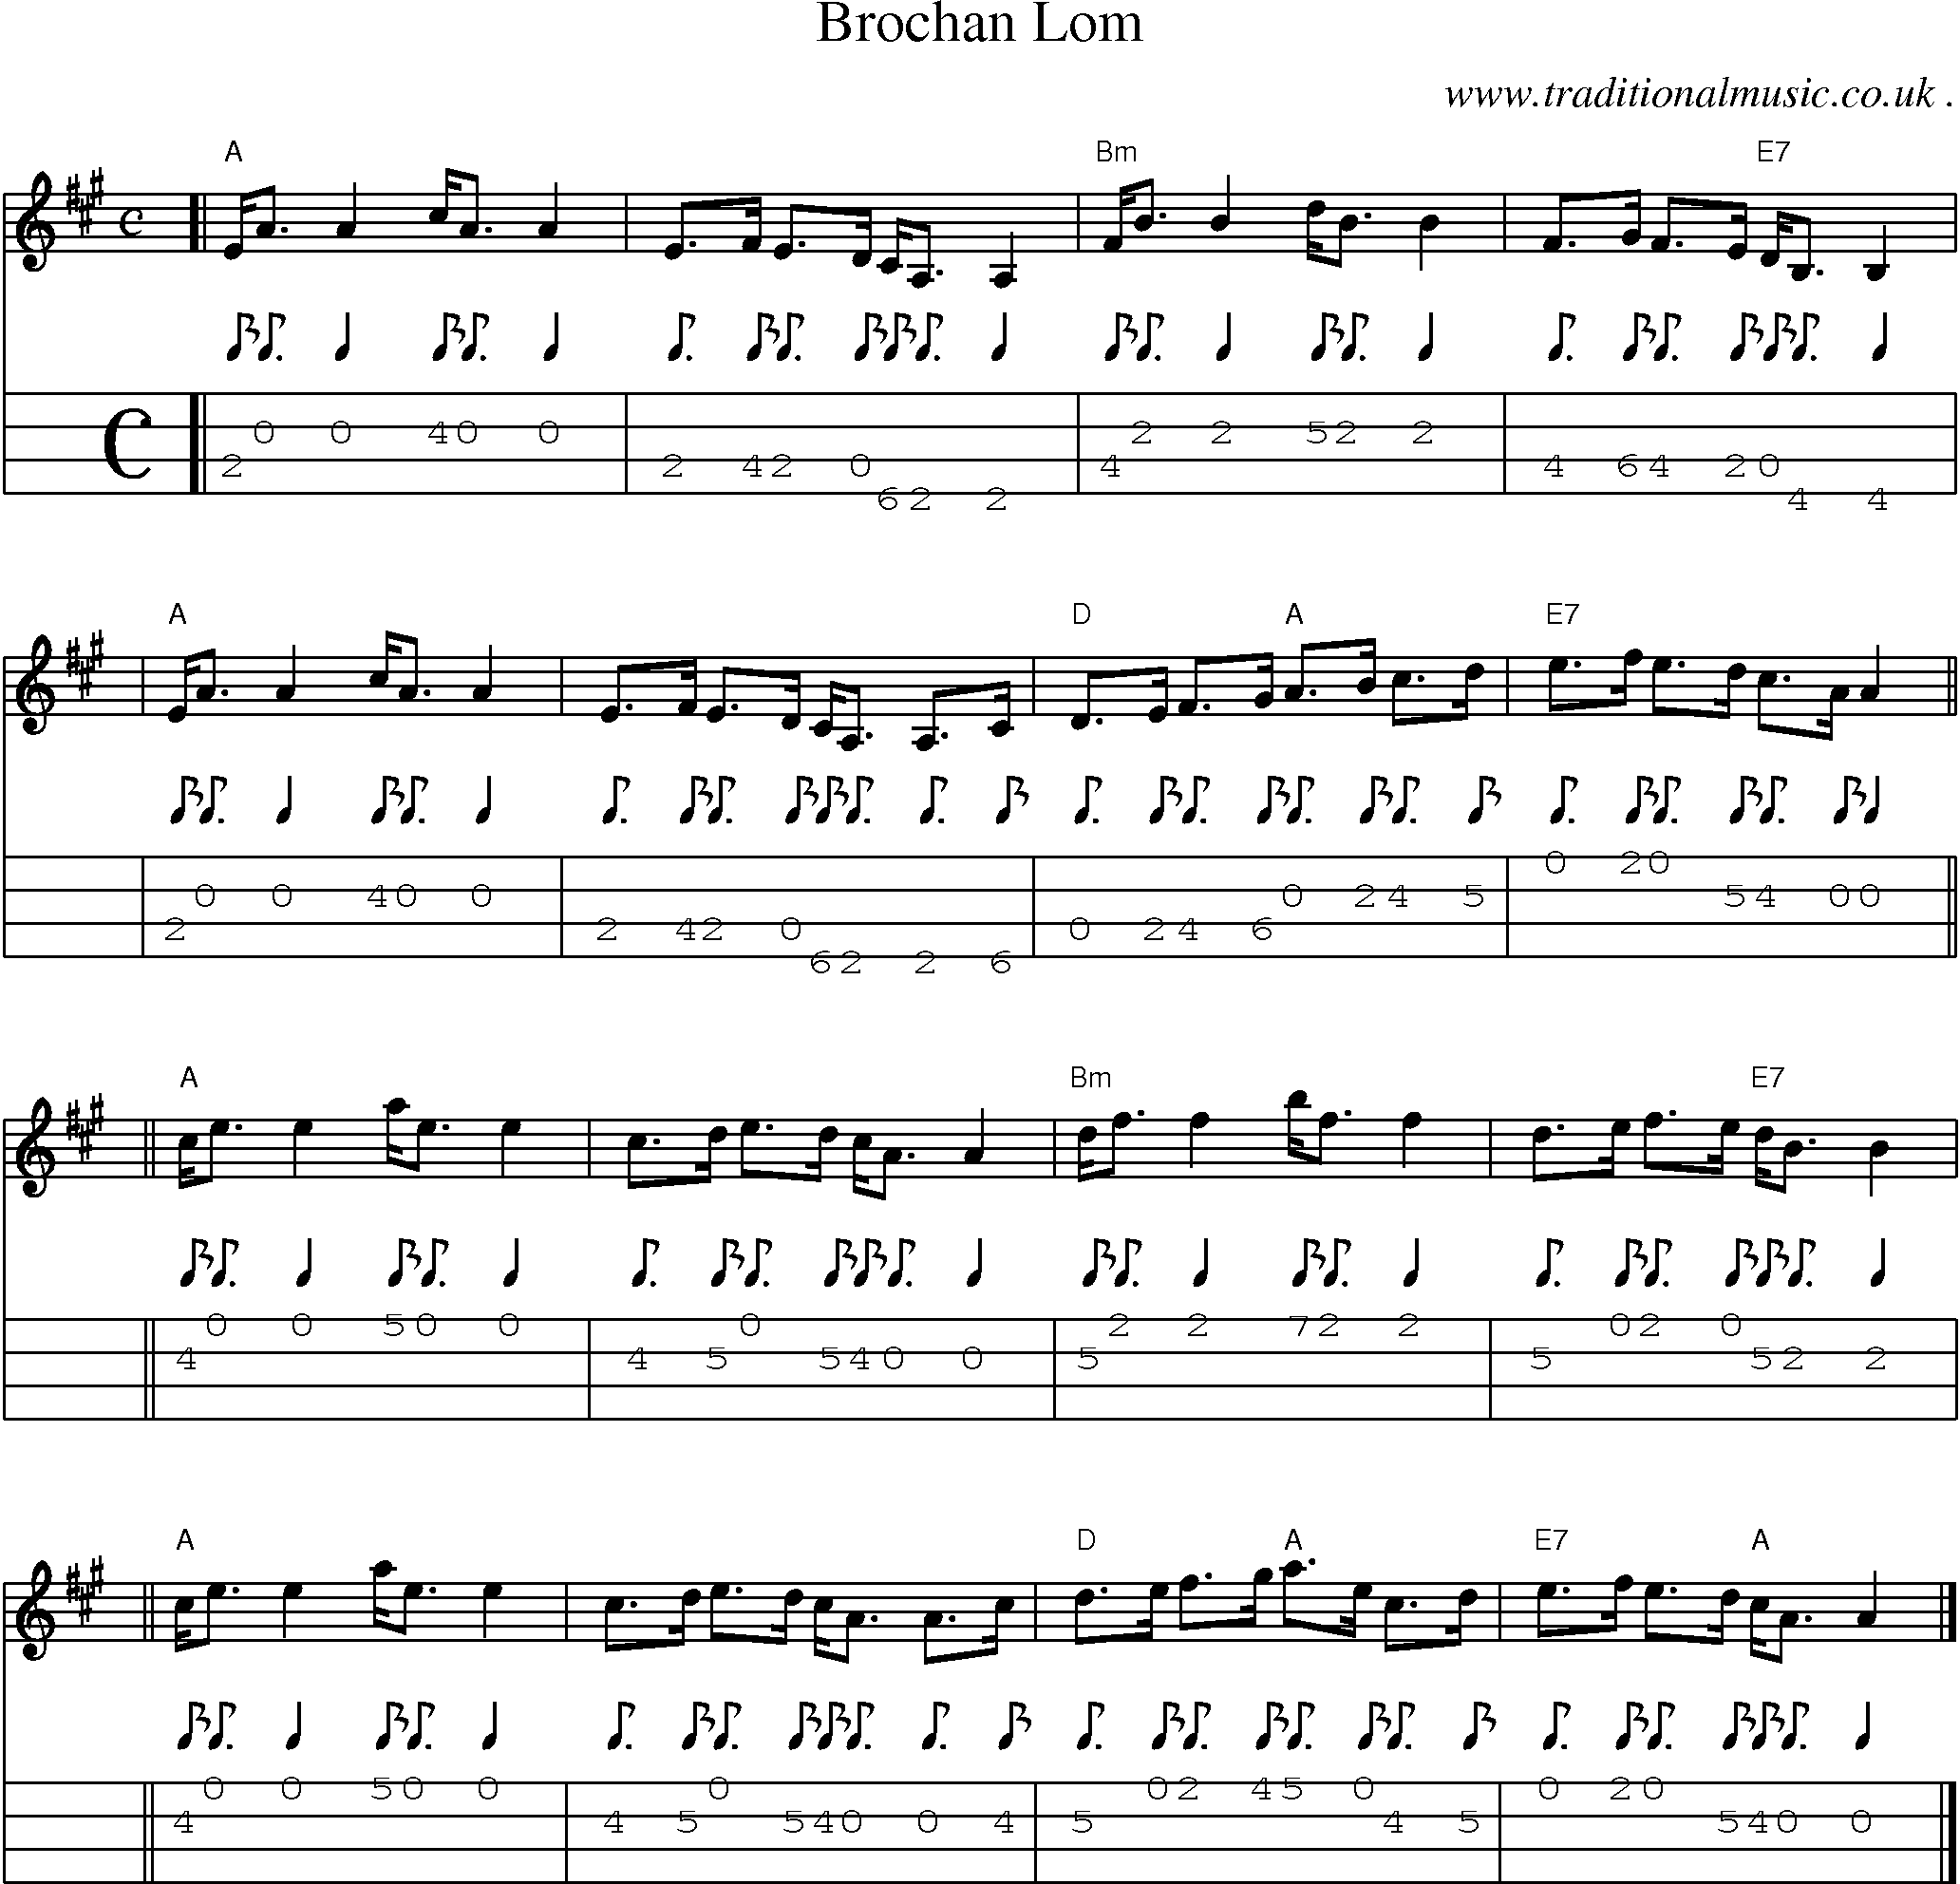 Sheet-music  score, Chords and Mandolin Tabs for Brochan Lom